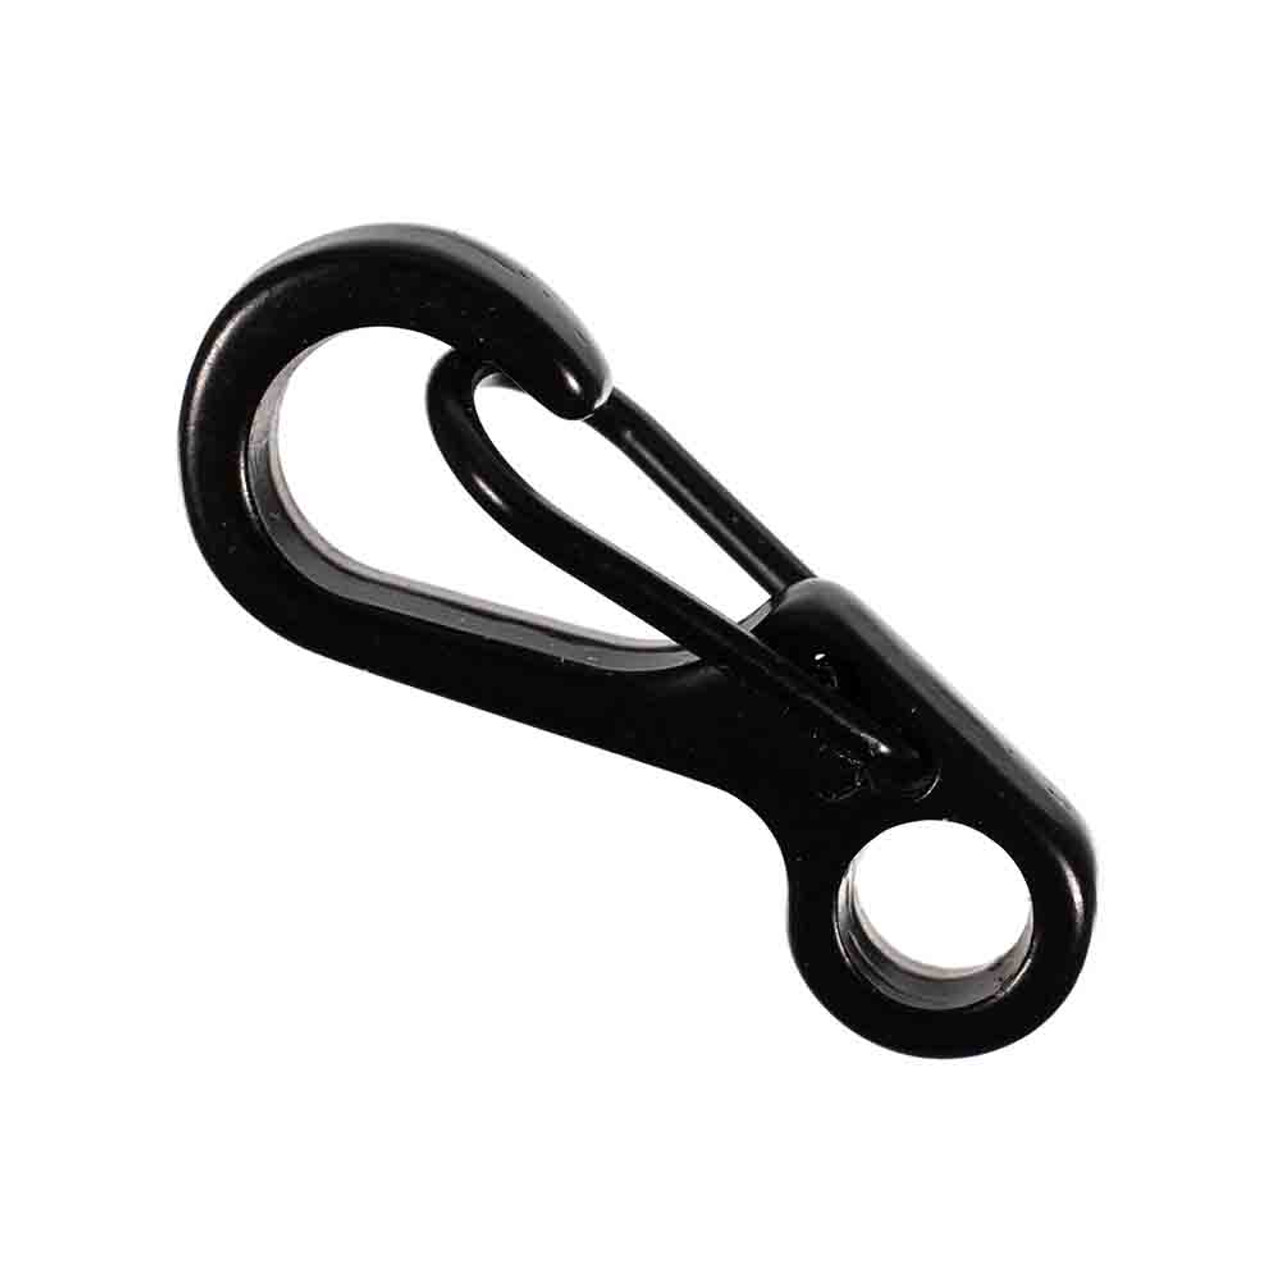 GOLBERG S-Hooks - Various Sizes and Pack Options Available